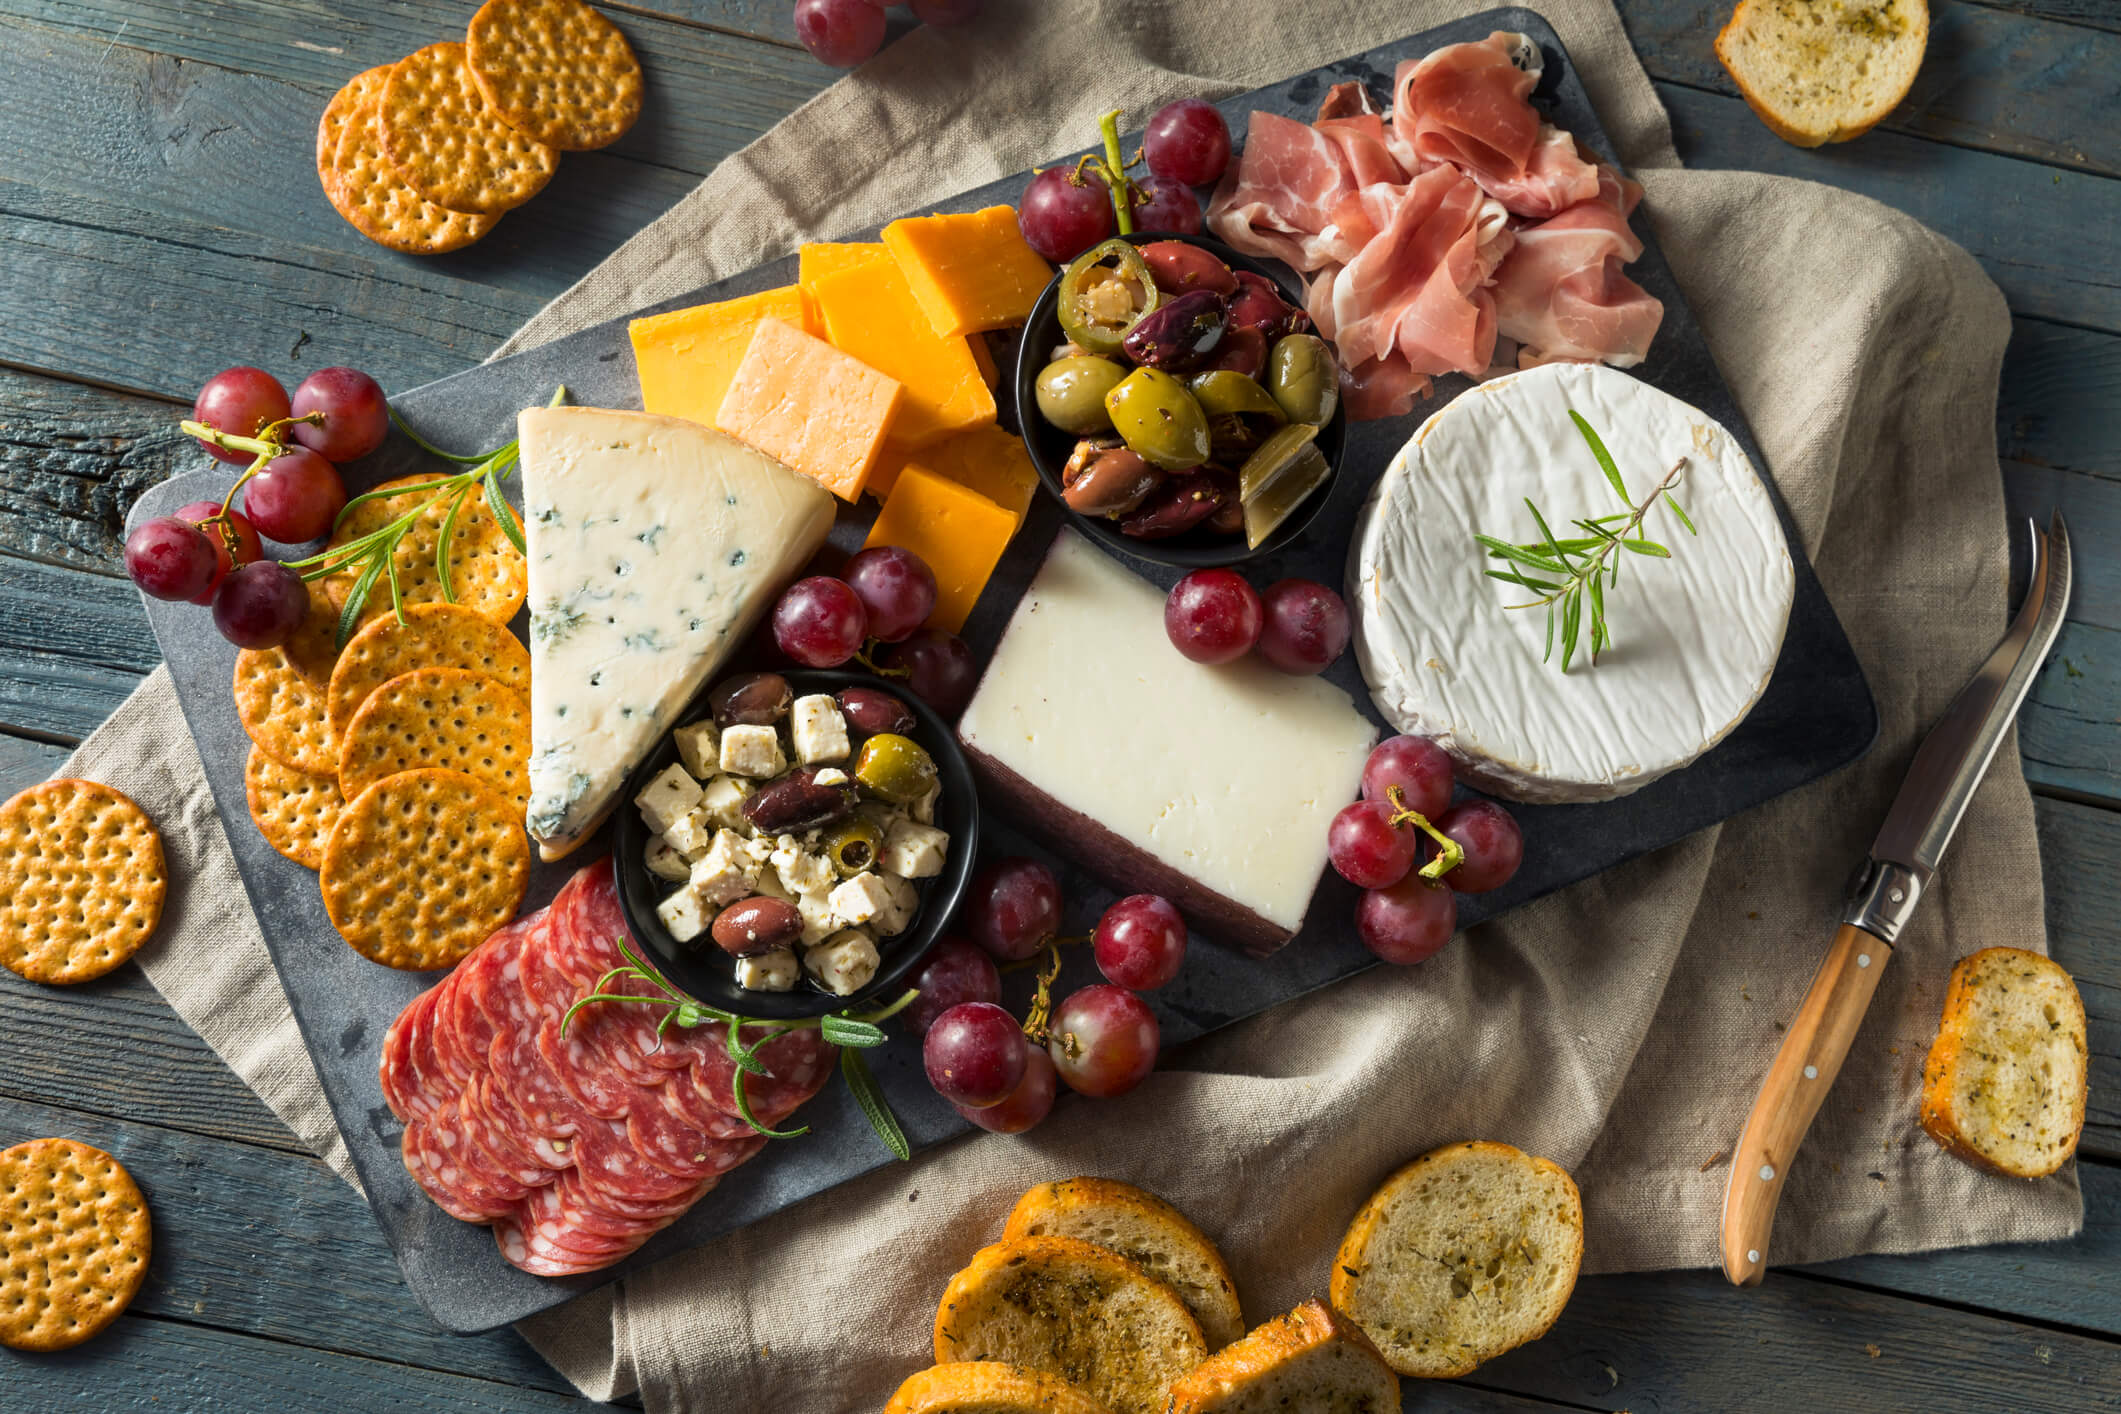 Get creative when you arrange your cheese board.